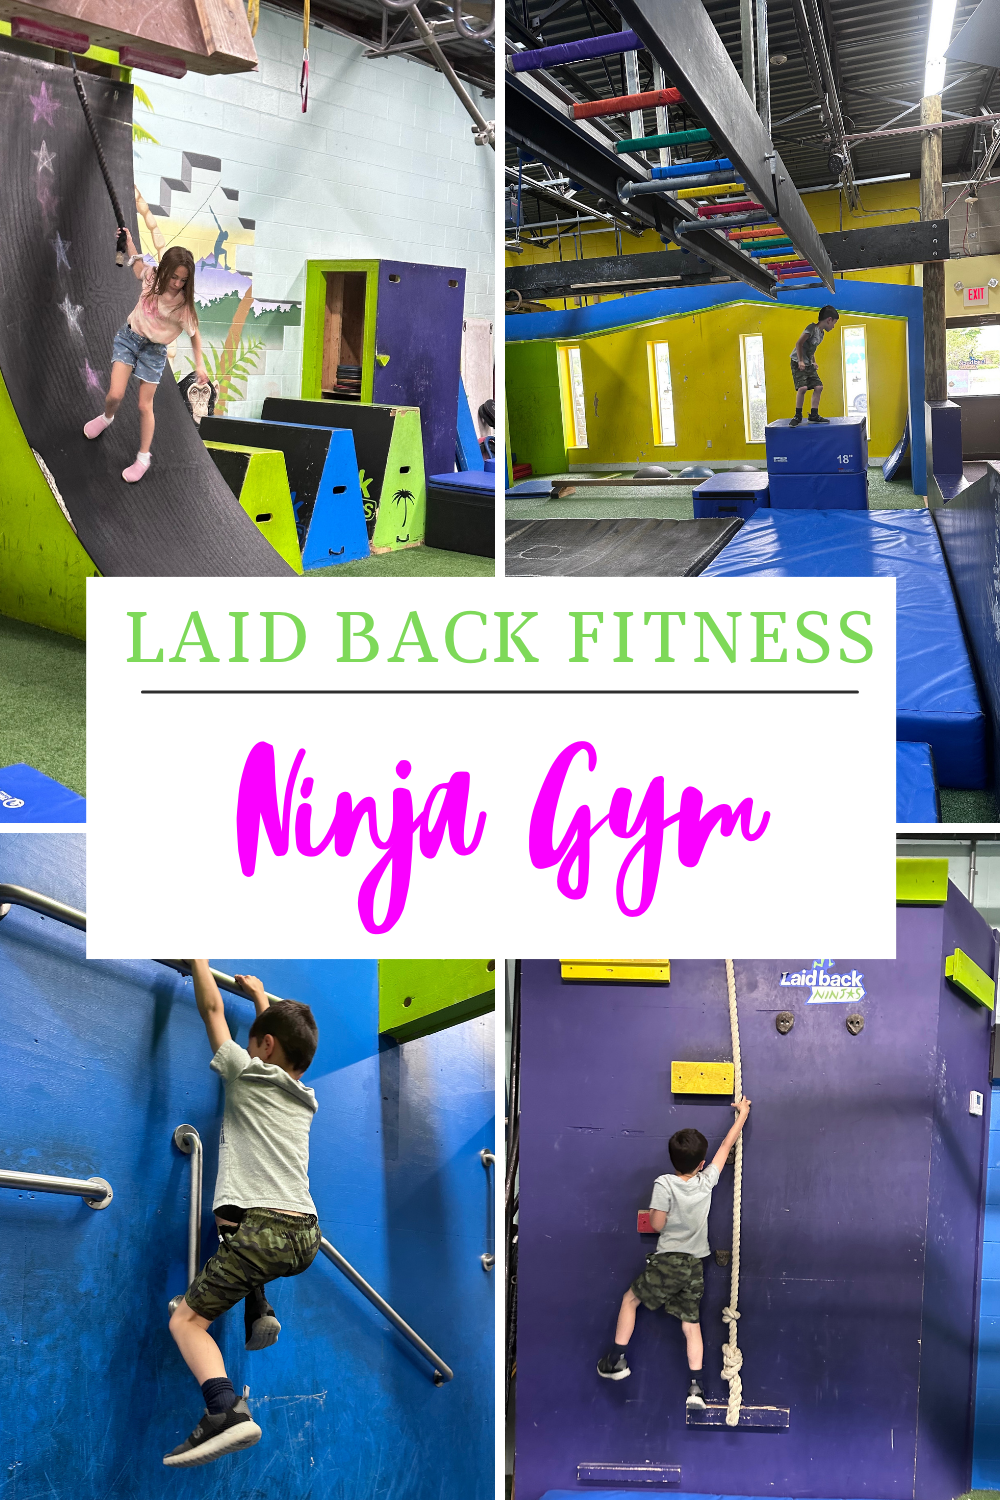 Laid Back Fitness ninja gym and training center in Rhode Island for kids and adults